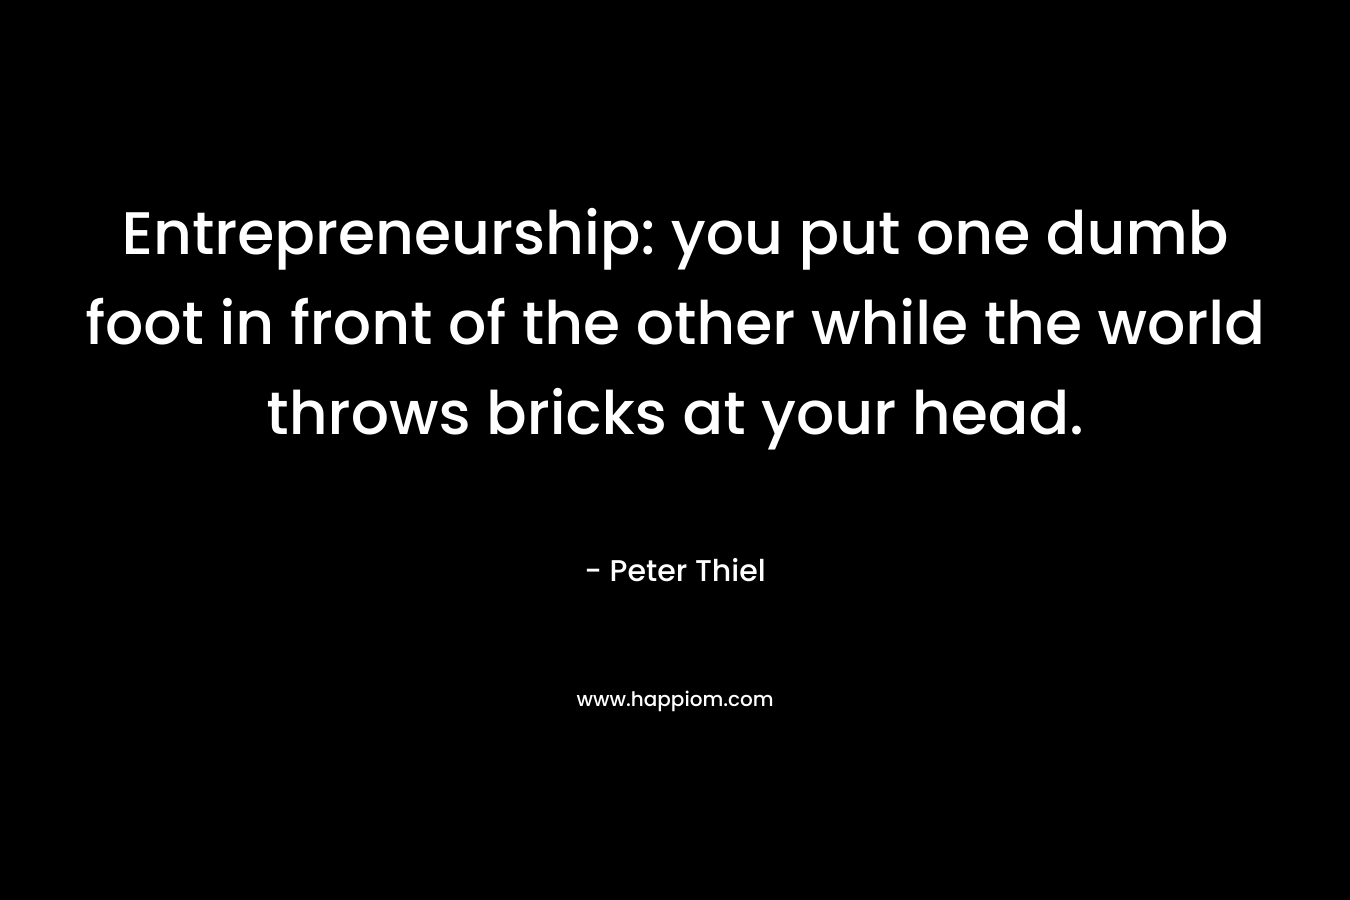 Entrepreneurship: you put one dumb foot in front of the other while the world throws bricks at your head.